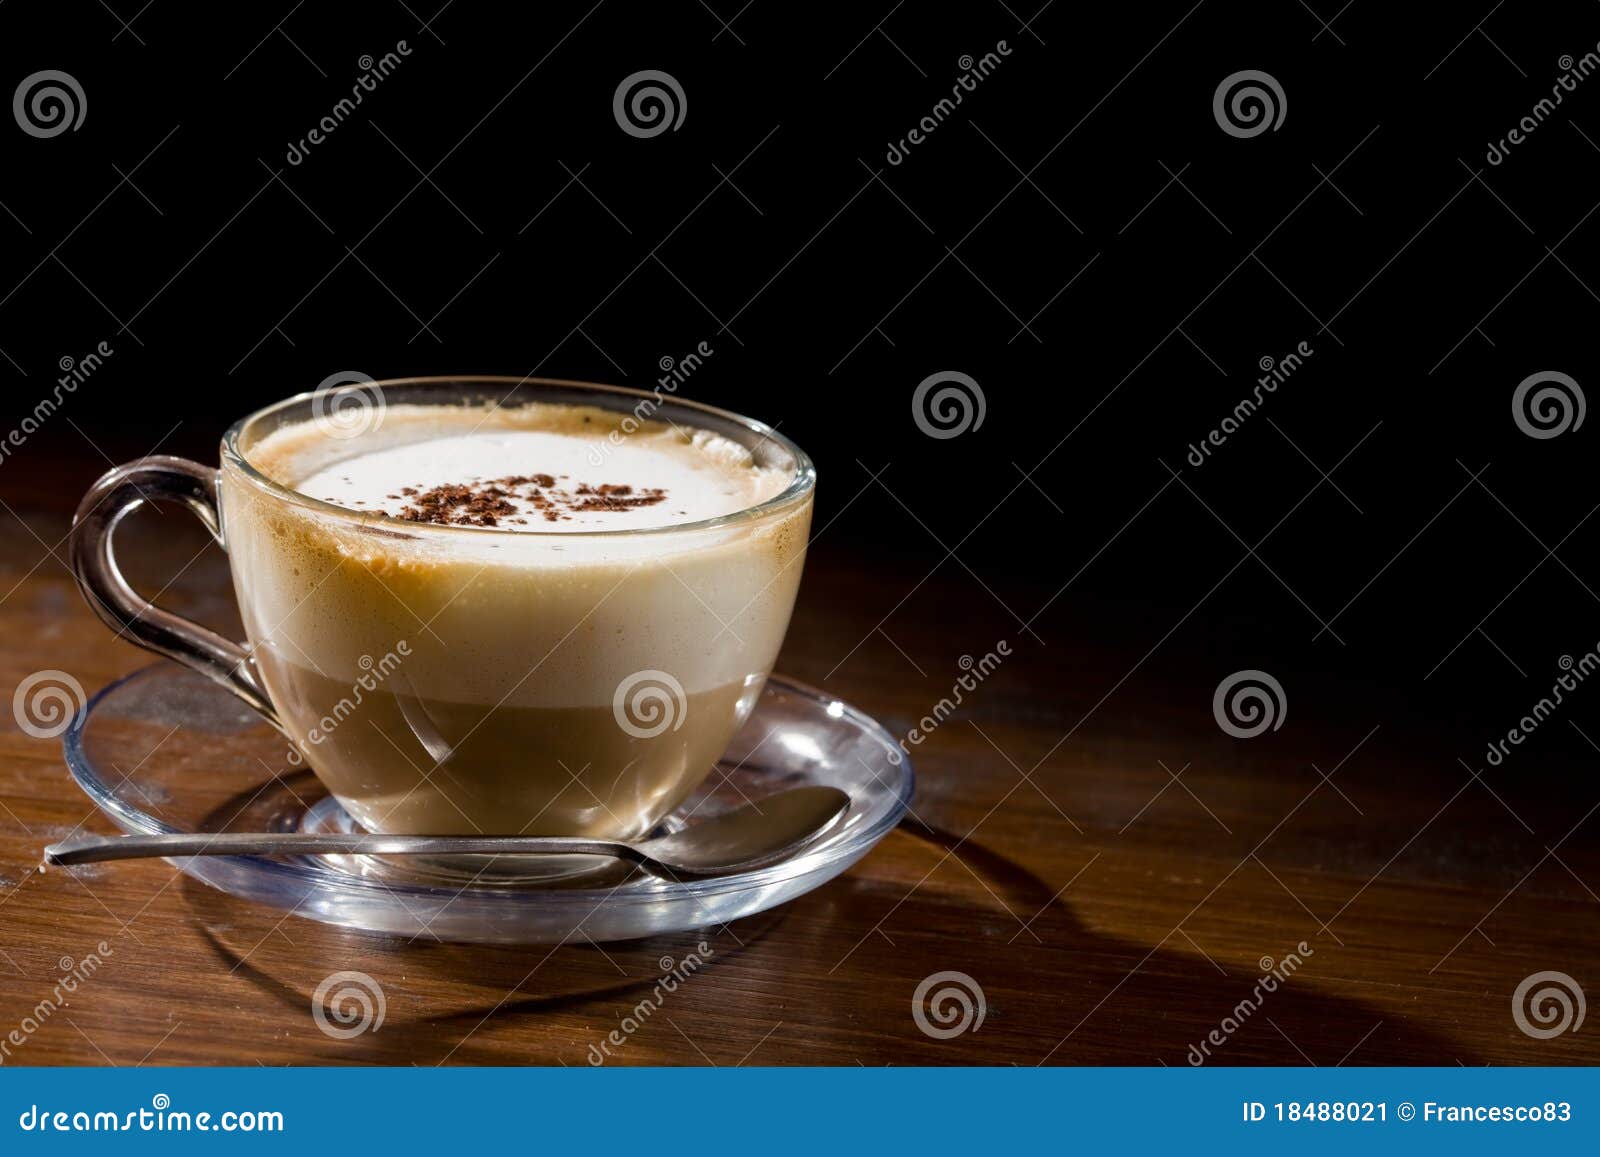 cappuccino on wood table